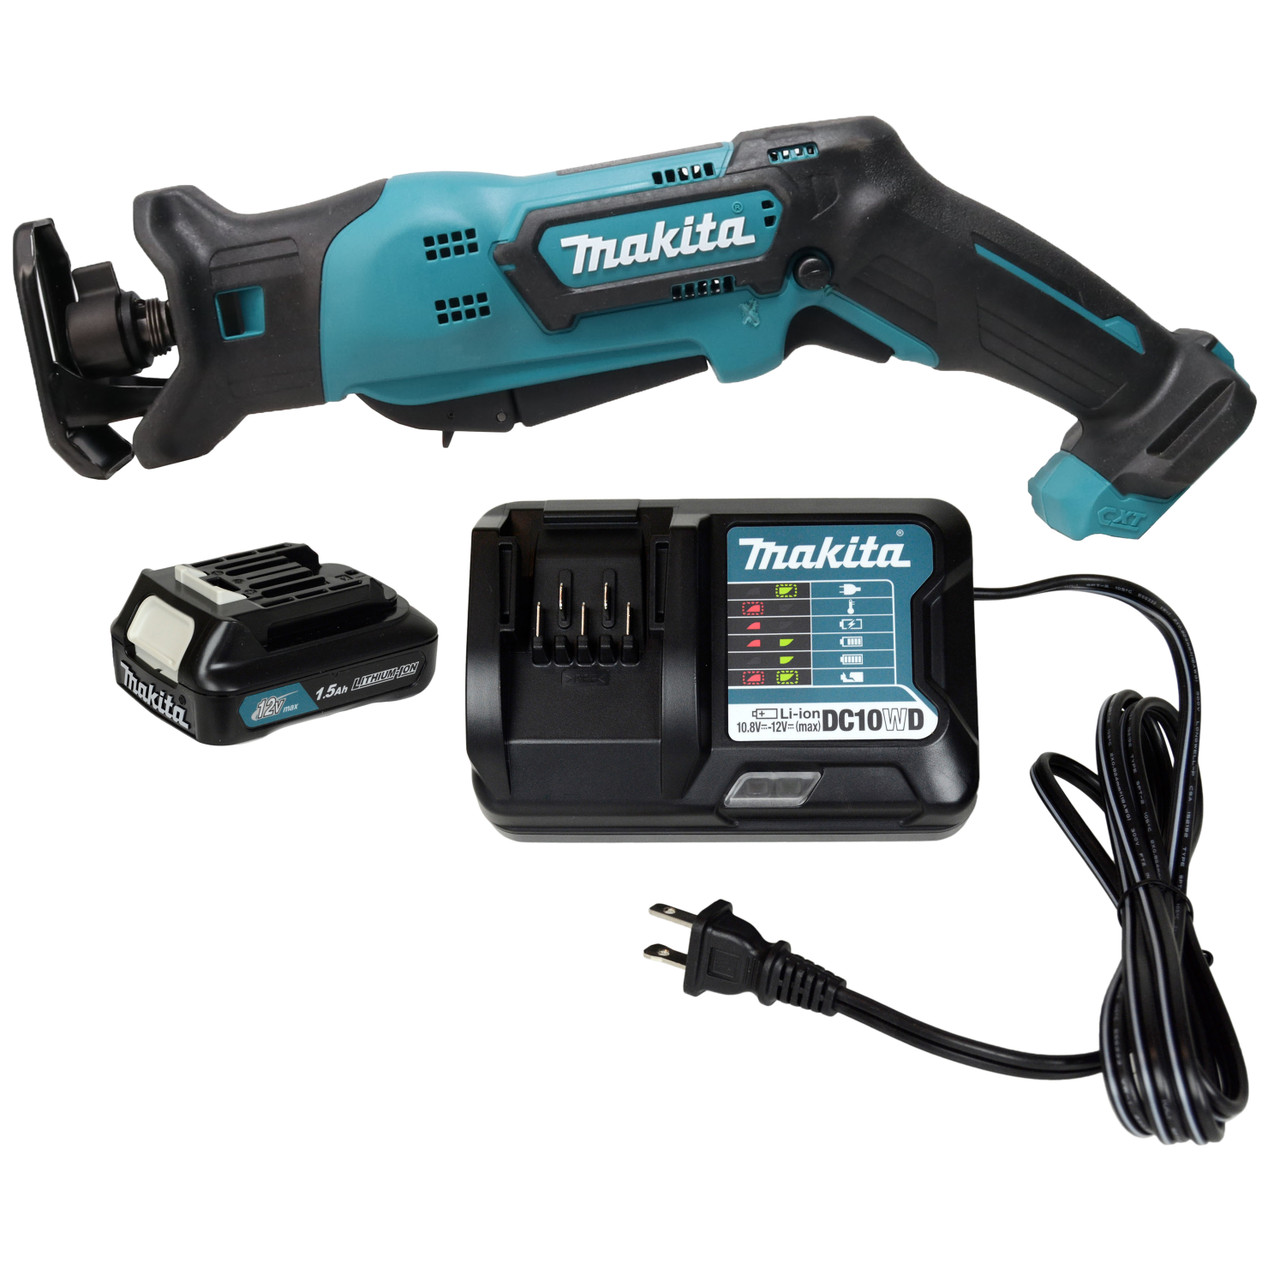 Makita RJ03Z-SU 12V (Slightly Used) BL1021B 2.0Ah Battery DC10WD Battery Charger | Helton Tool & Home